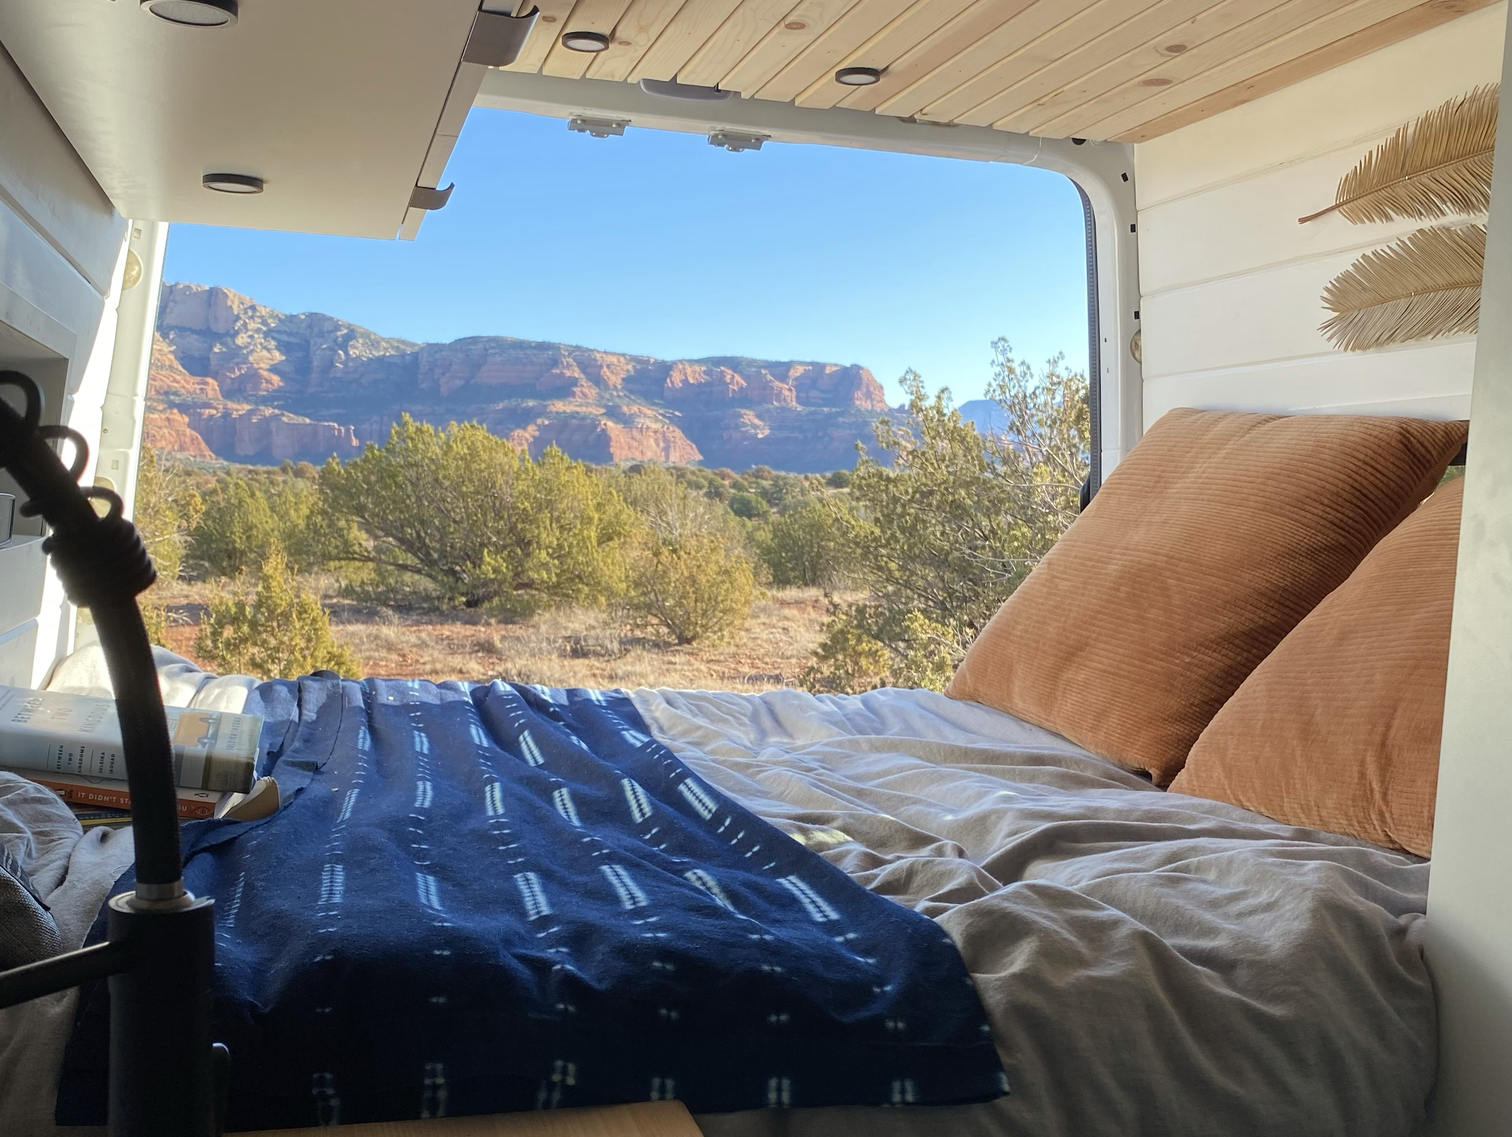 A bed with orange pillows in the back of a white van looks out on a mountainous landscape.